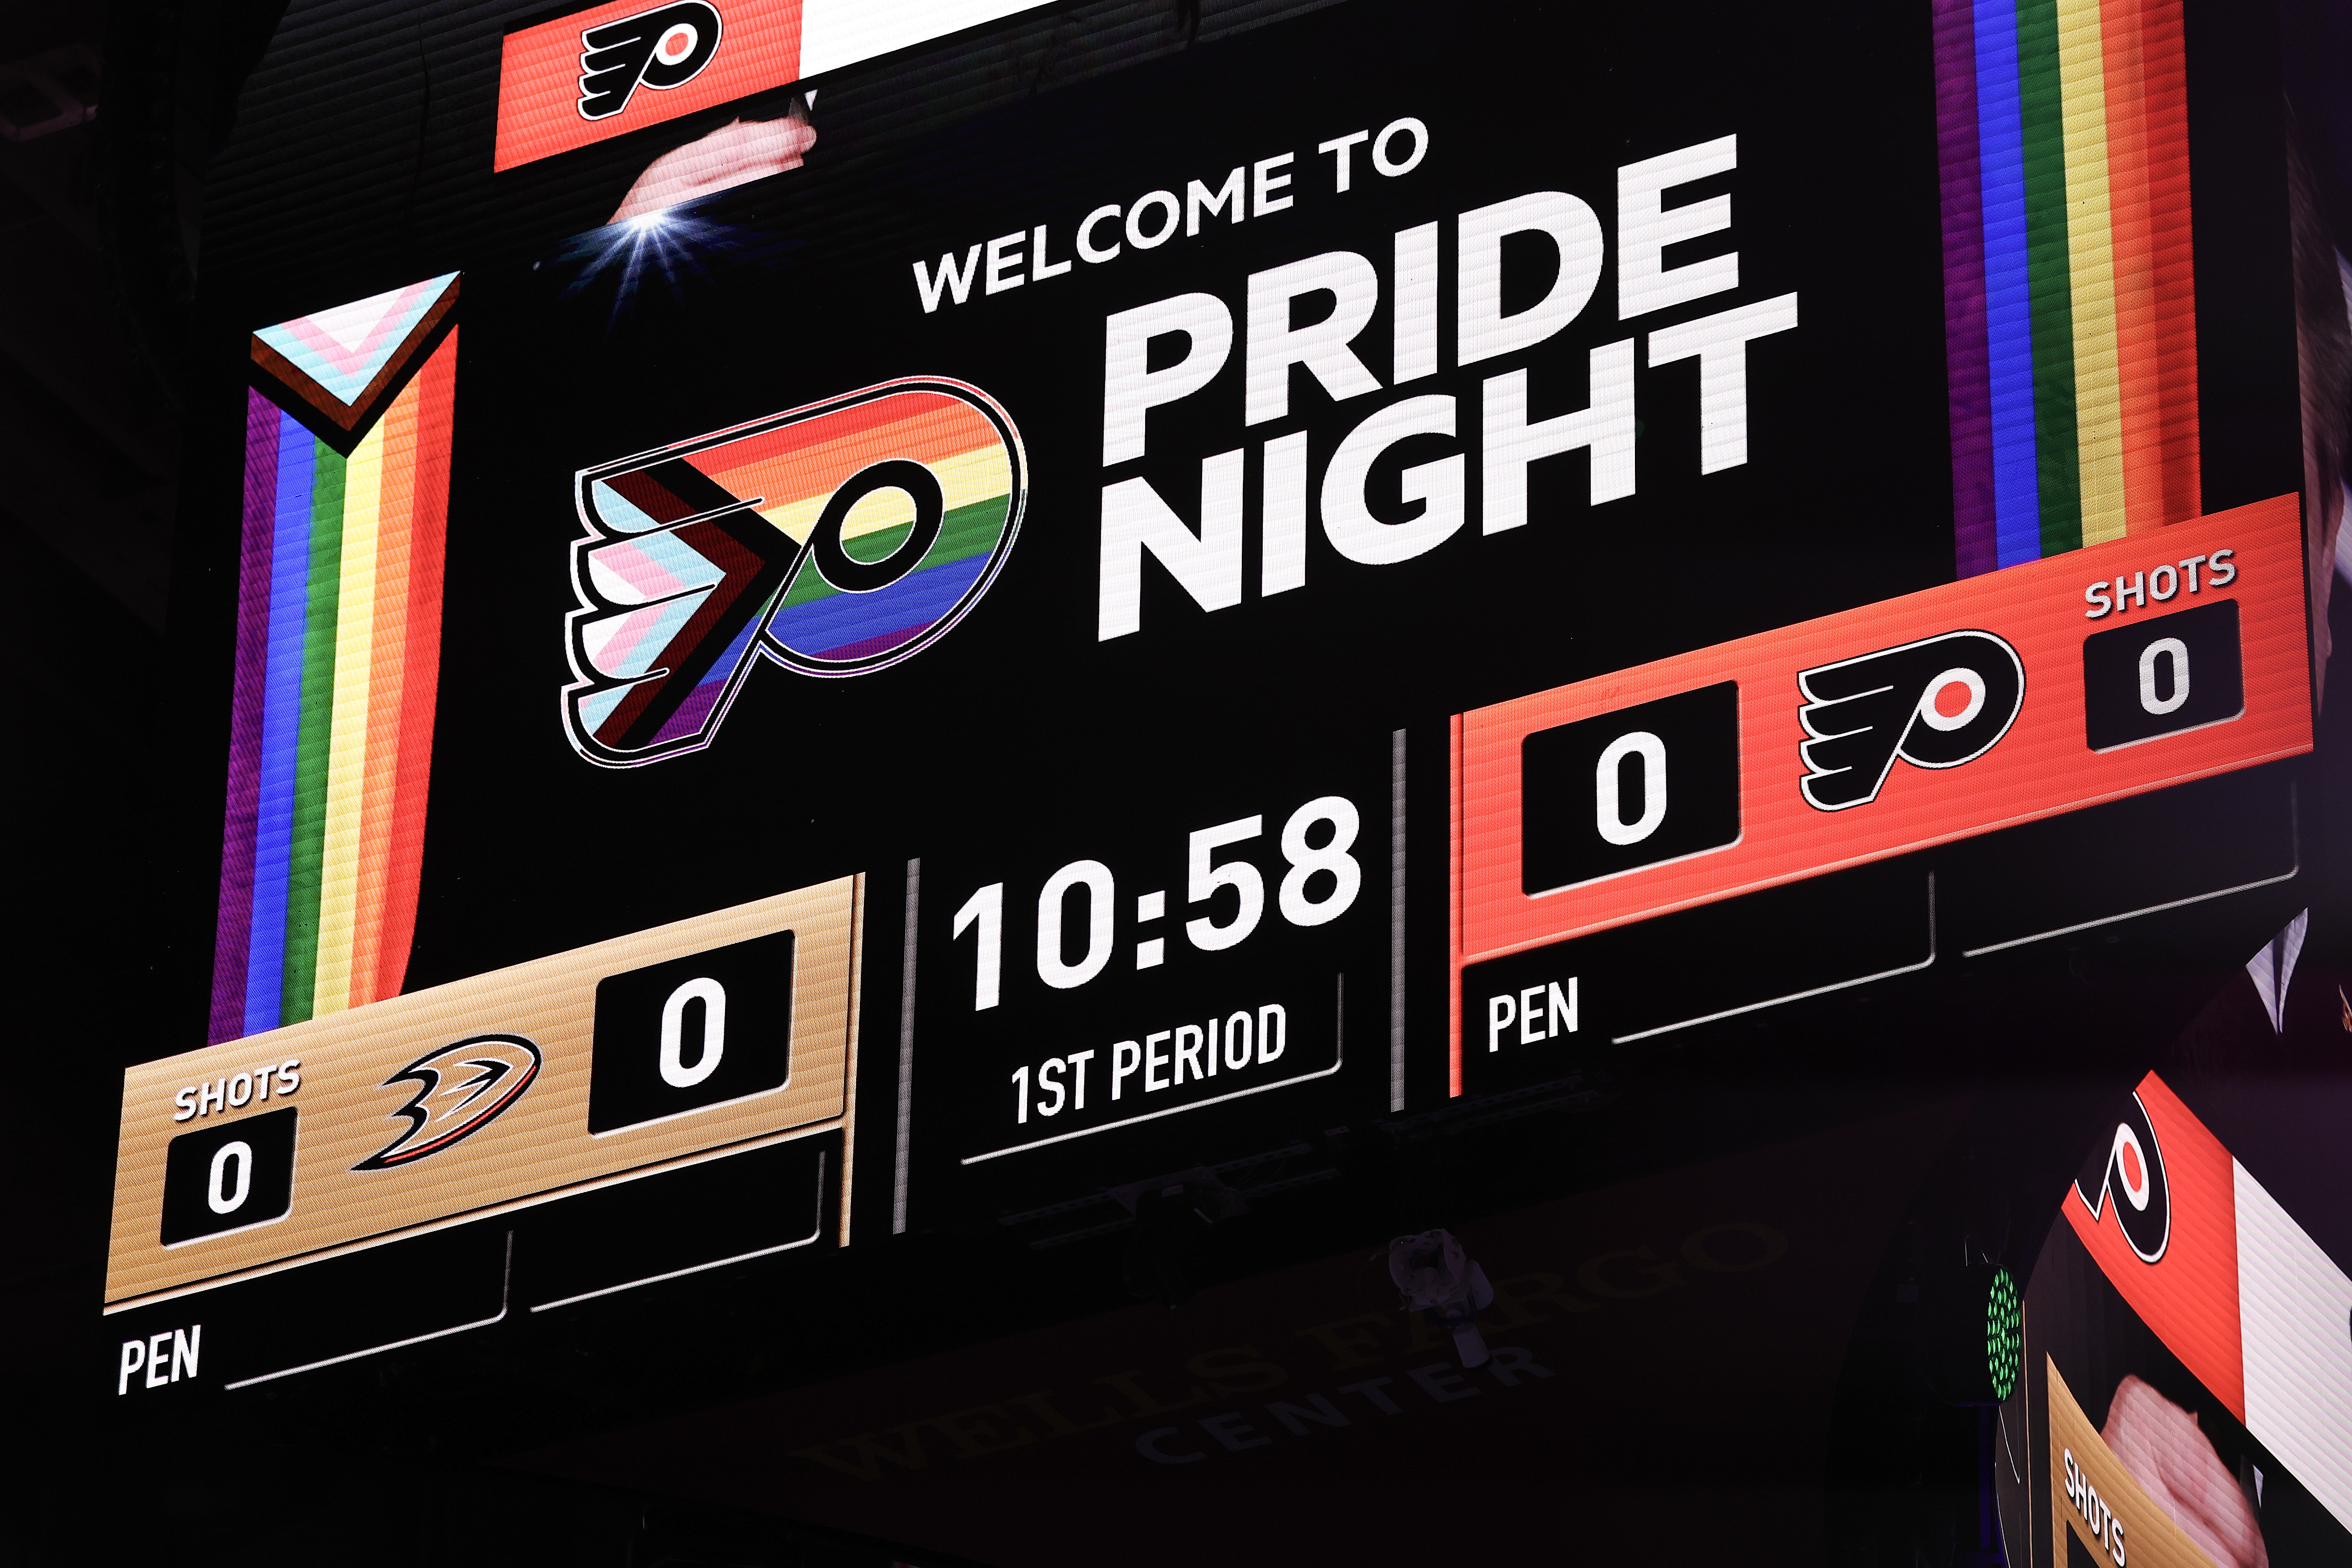 Ivan Provorov Refuses to Participate in Team's LGBT Pride